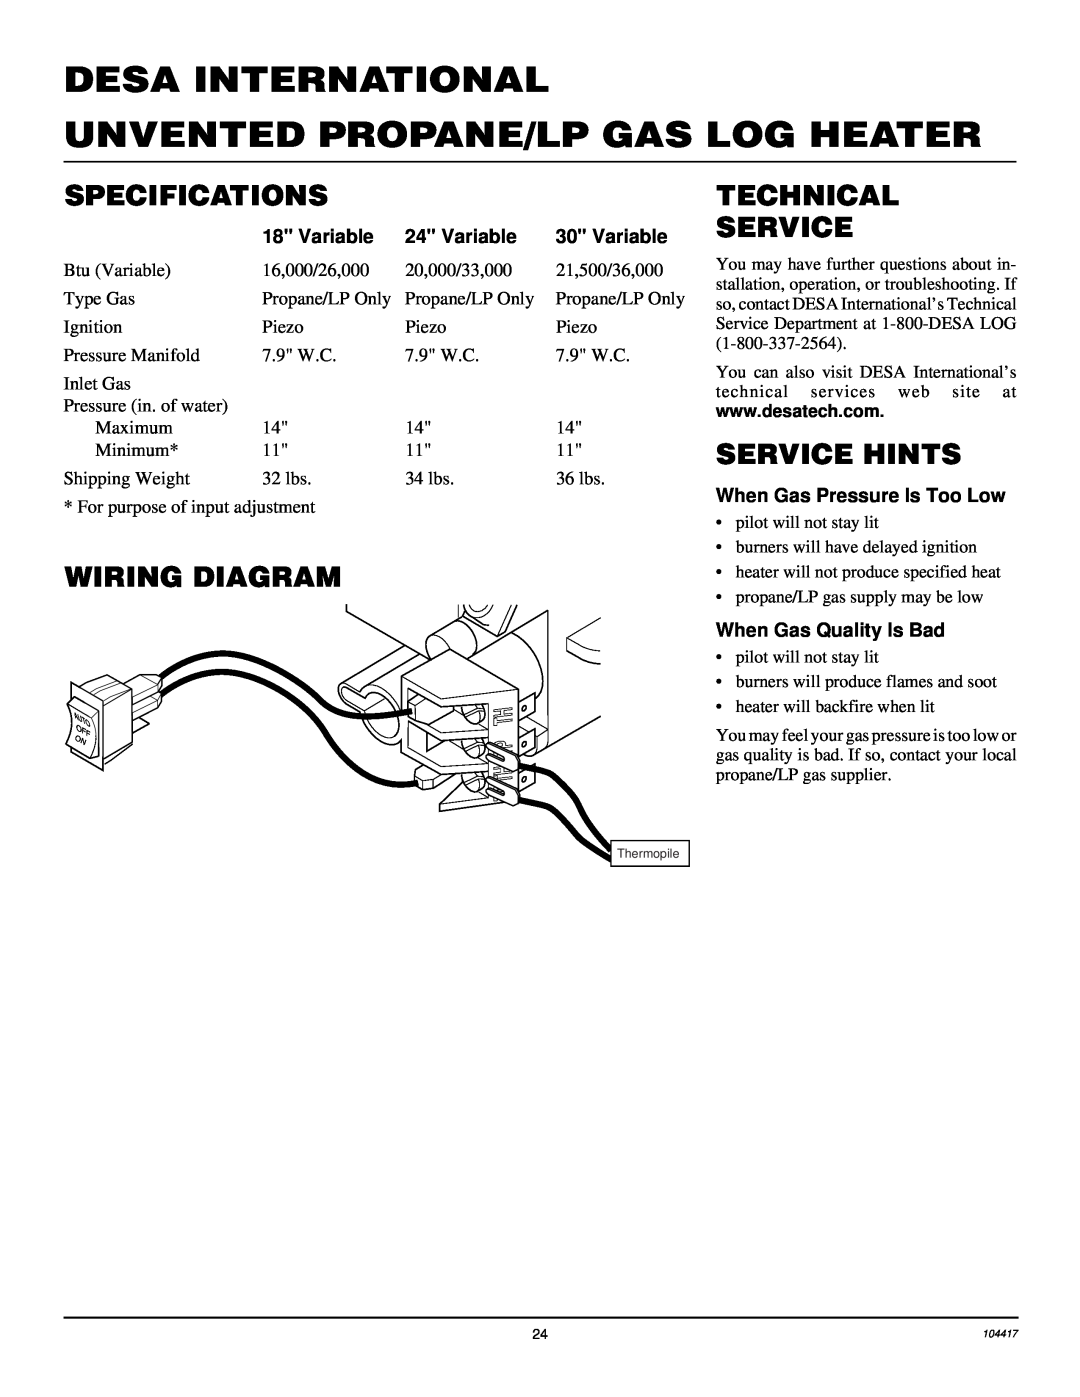 Desa CFS18PRA Specifications, Wiring Diagram, Technical Service, Service Hints, Variable, When Gas Pressure Is Too Low 